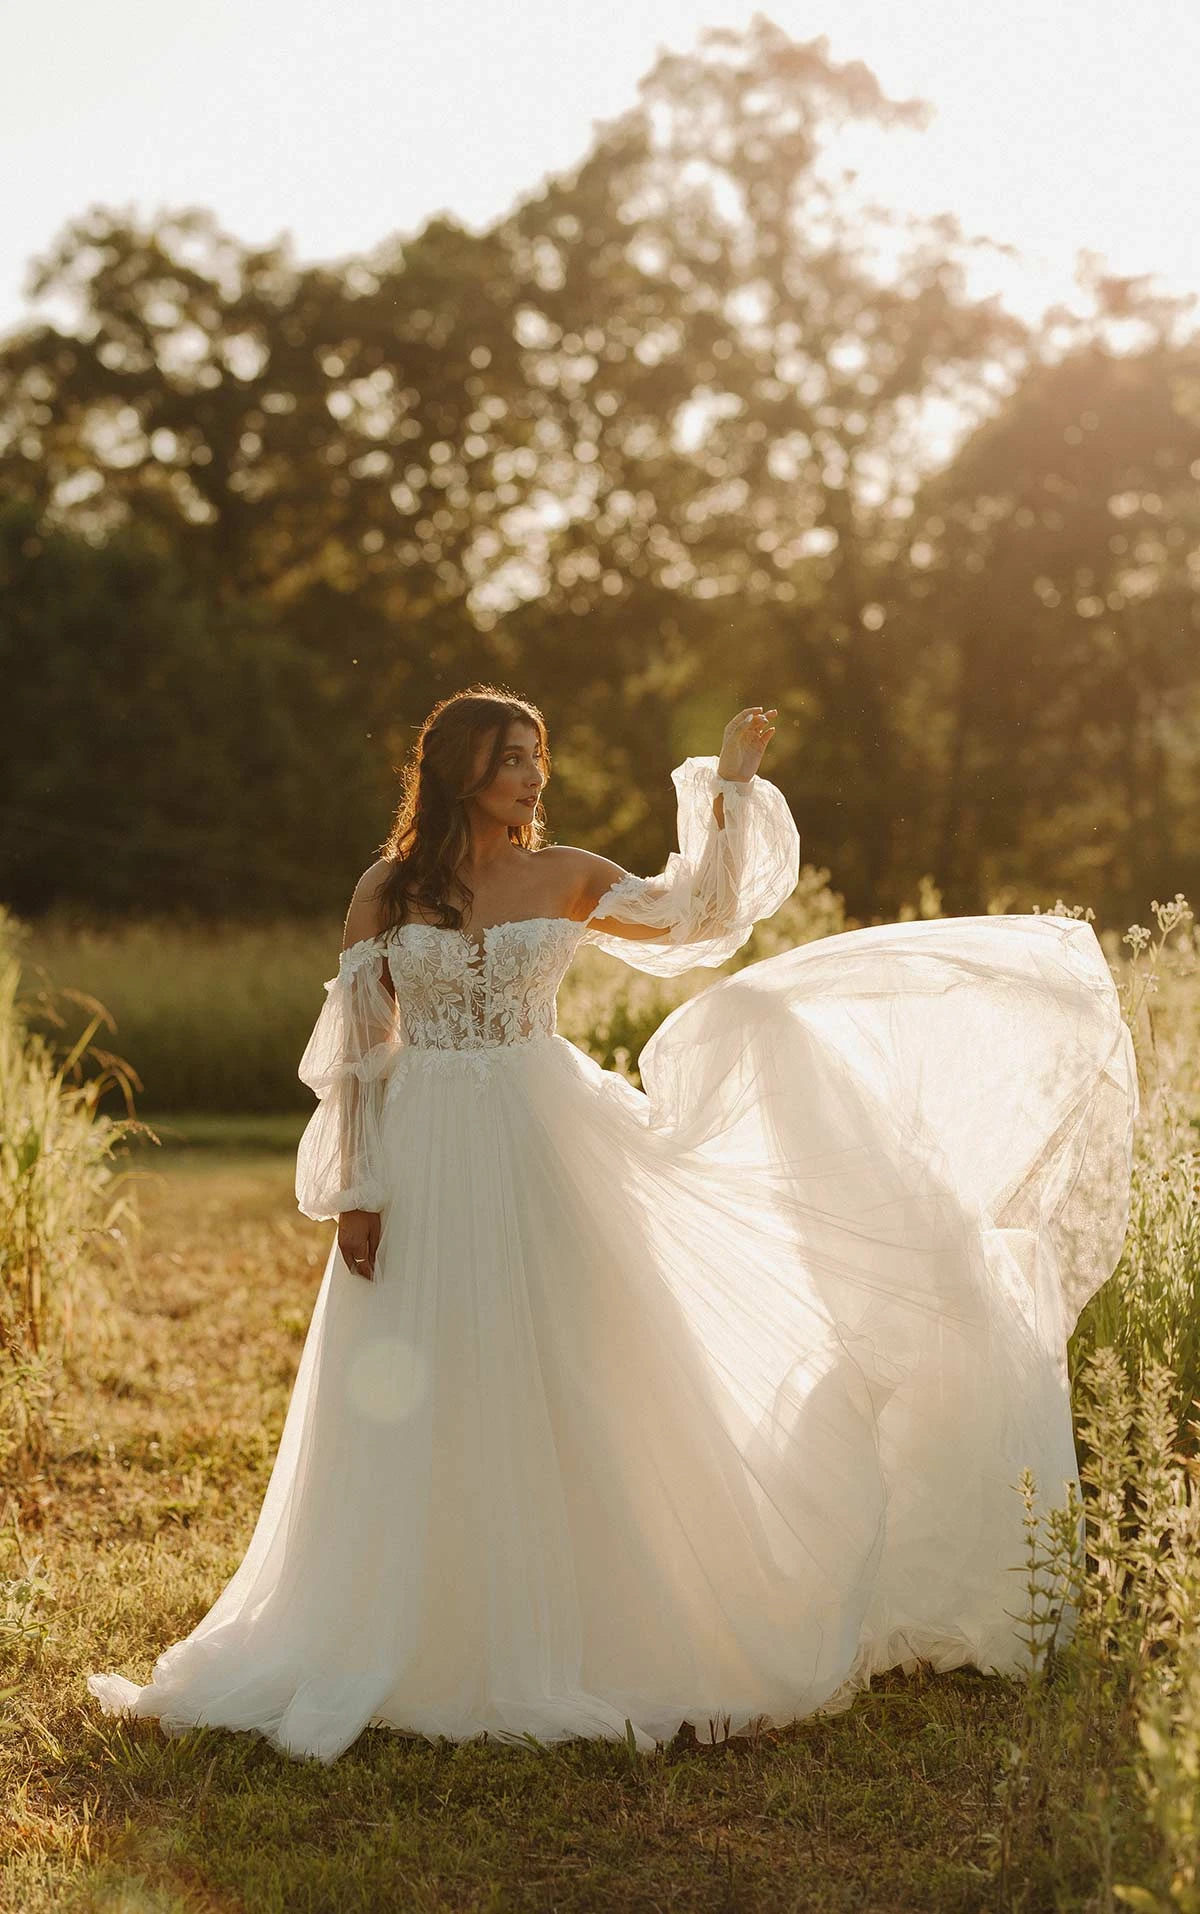 7573 Boho A-Line Wedding Dress with Lace and Tulle Off-the-Shoulder Sleeves  by Stella York